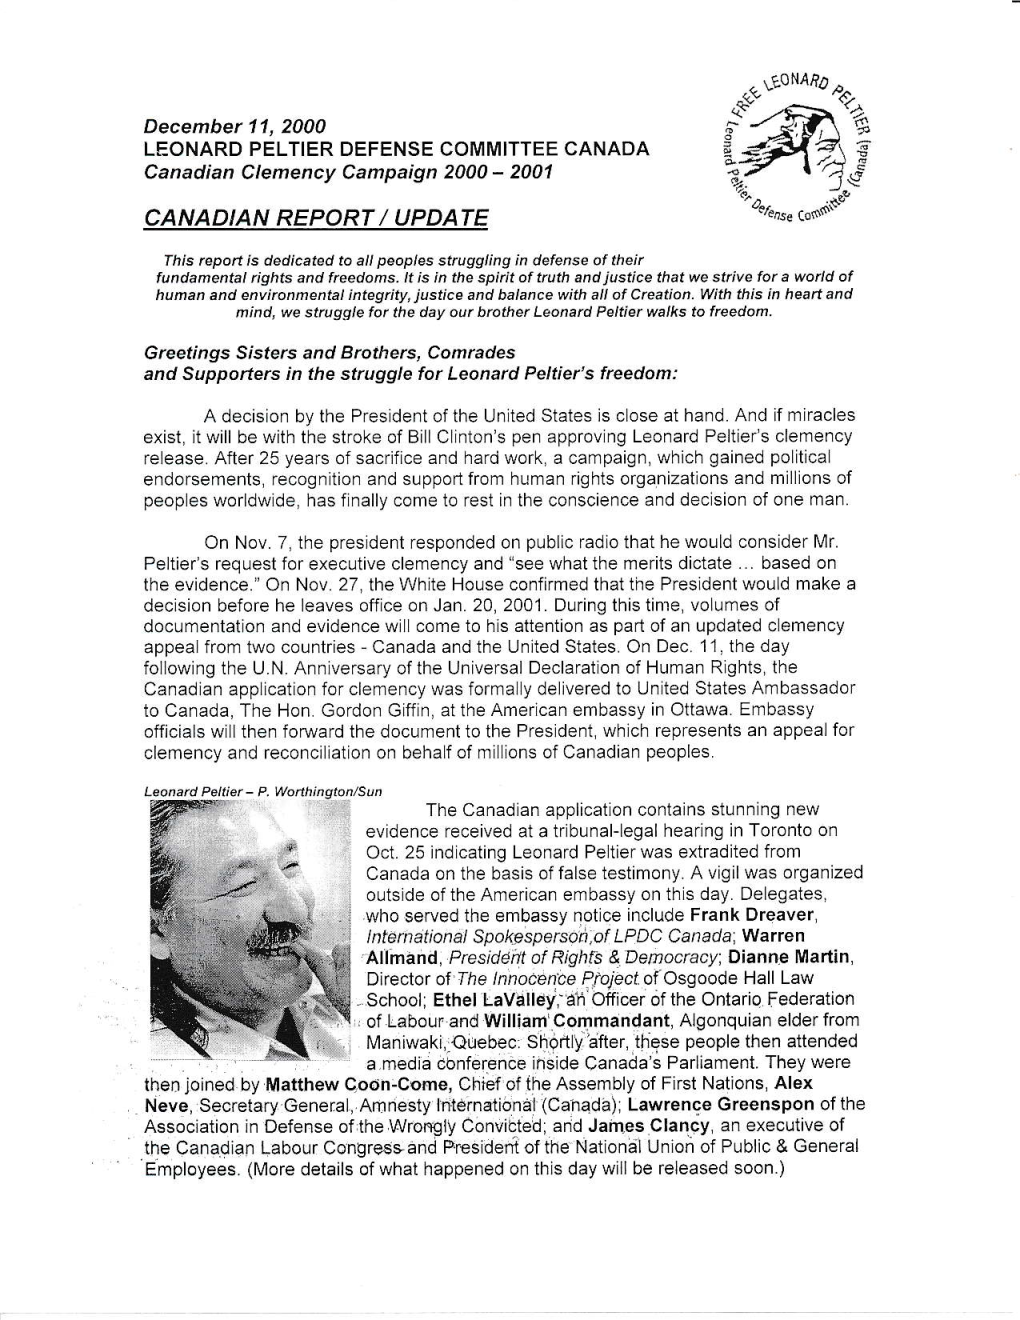 Rt- --S--A (: December 11, 2000 LEONARD PELTIER DEFENSE COMMITTEE CANADA Canadian Clemency Campaign 2000 - 2001 CANADIAN REPORT / UPDATE